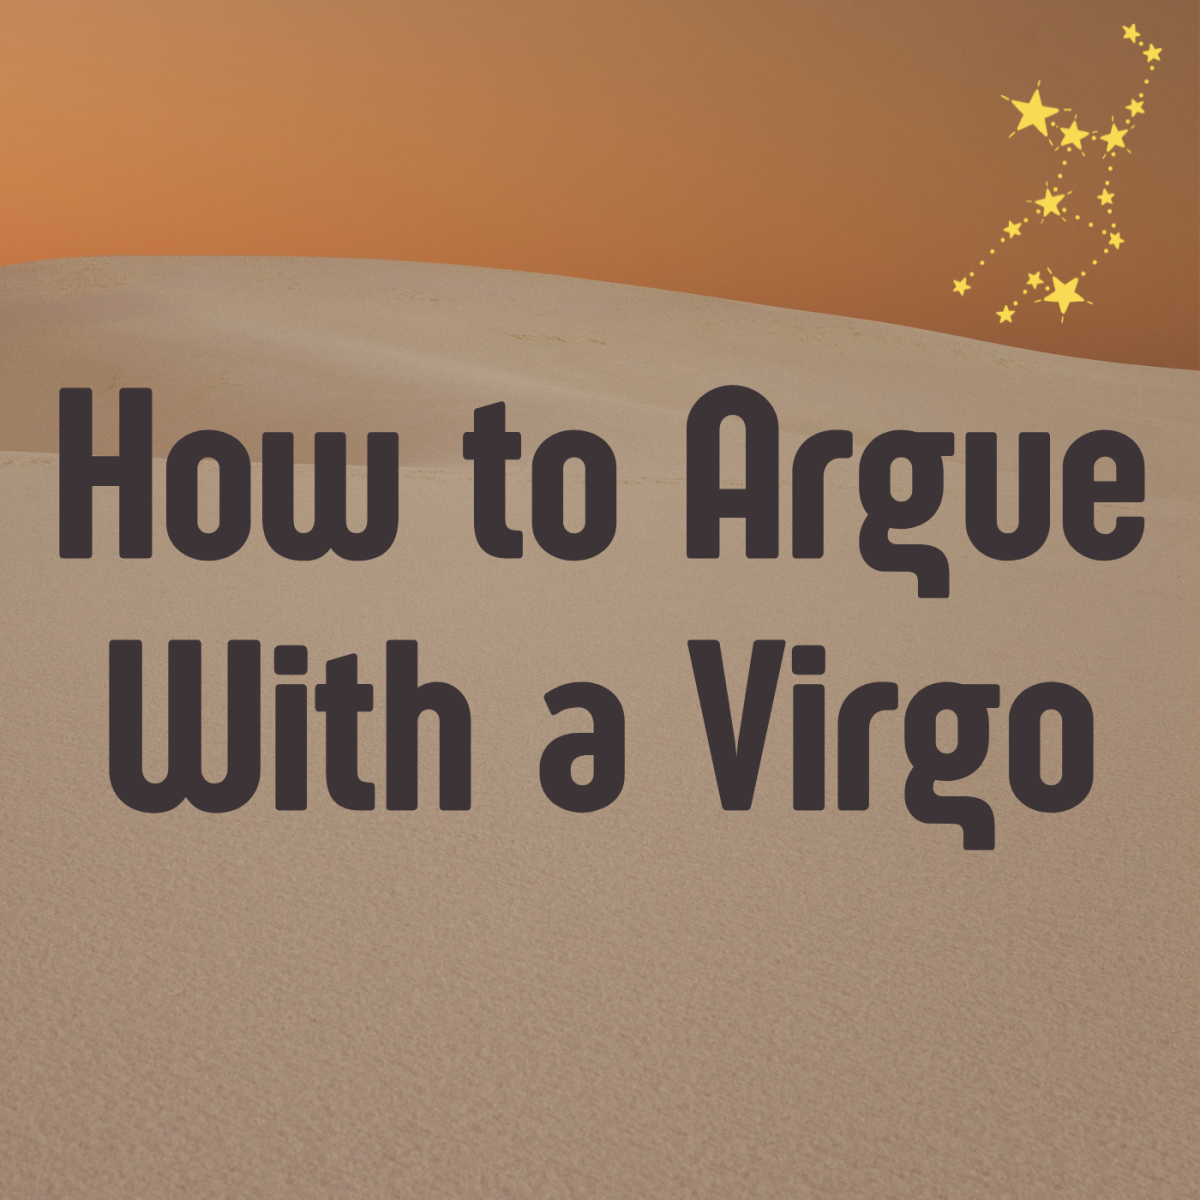 How to Argue With Your Virgo Partner: Be Delicate but Determined!